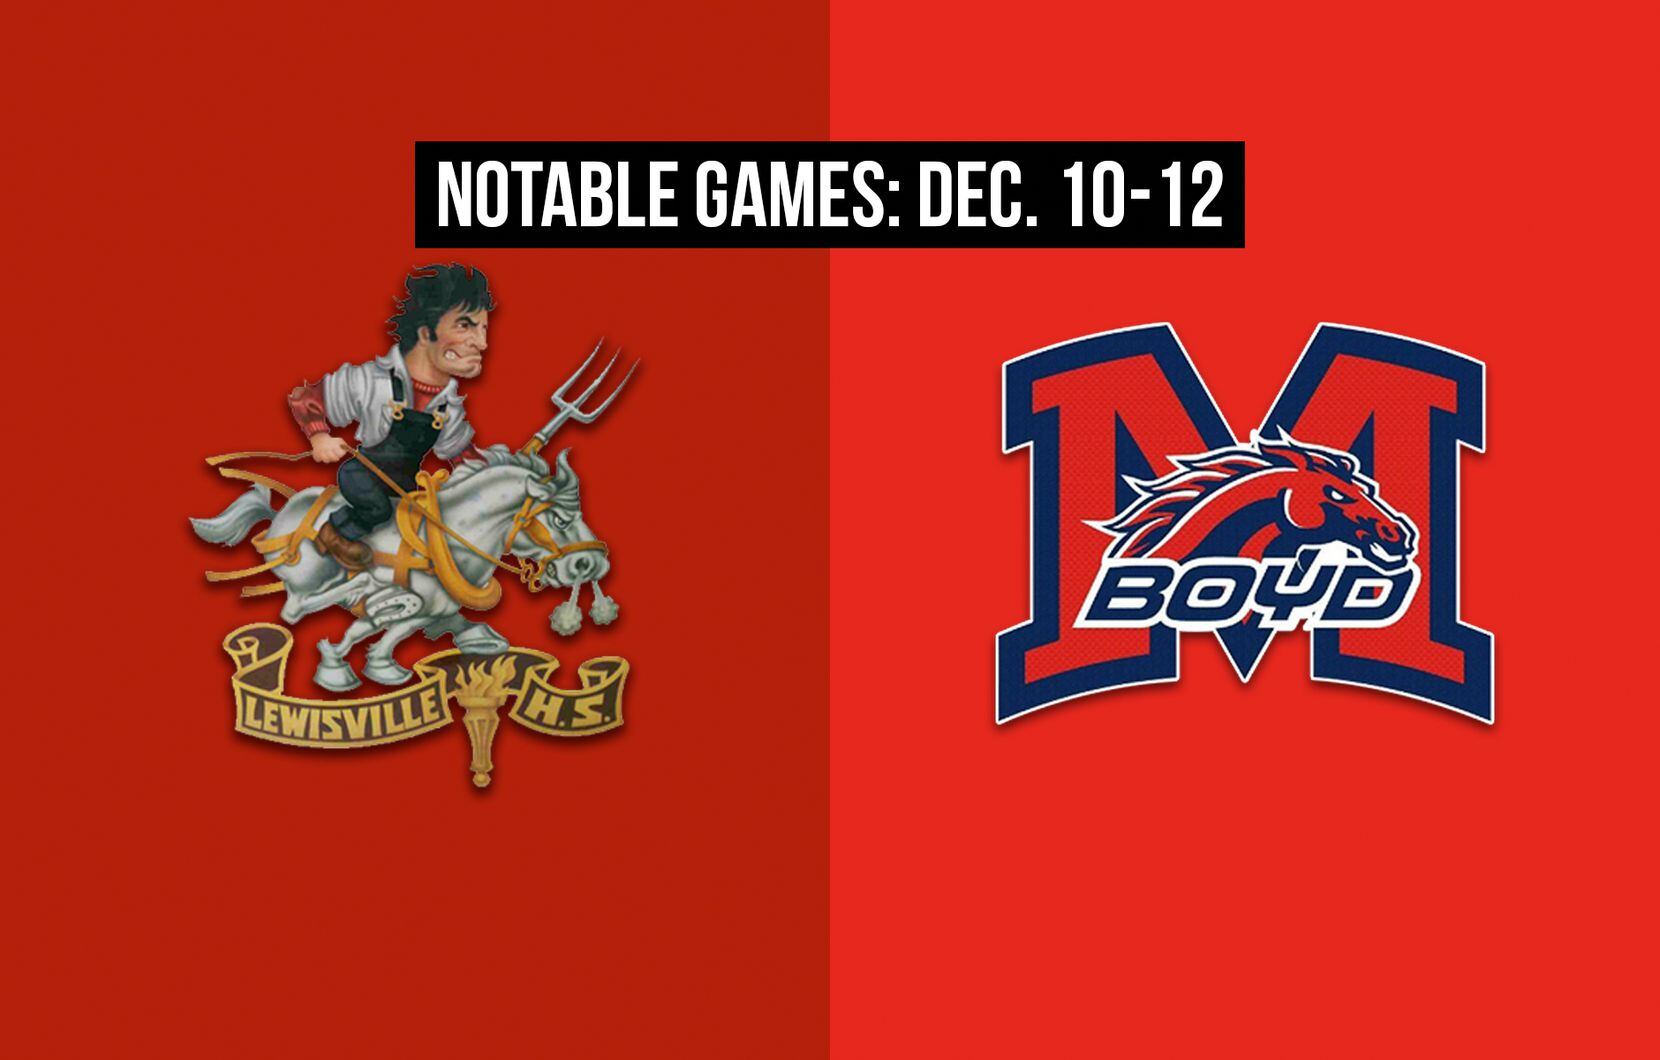 Notable games for the week of Dec. 10-12 of the 2020 season: Lewisville vs. McKinney Boyd.